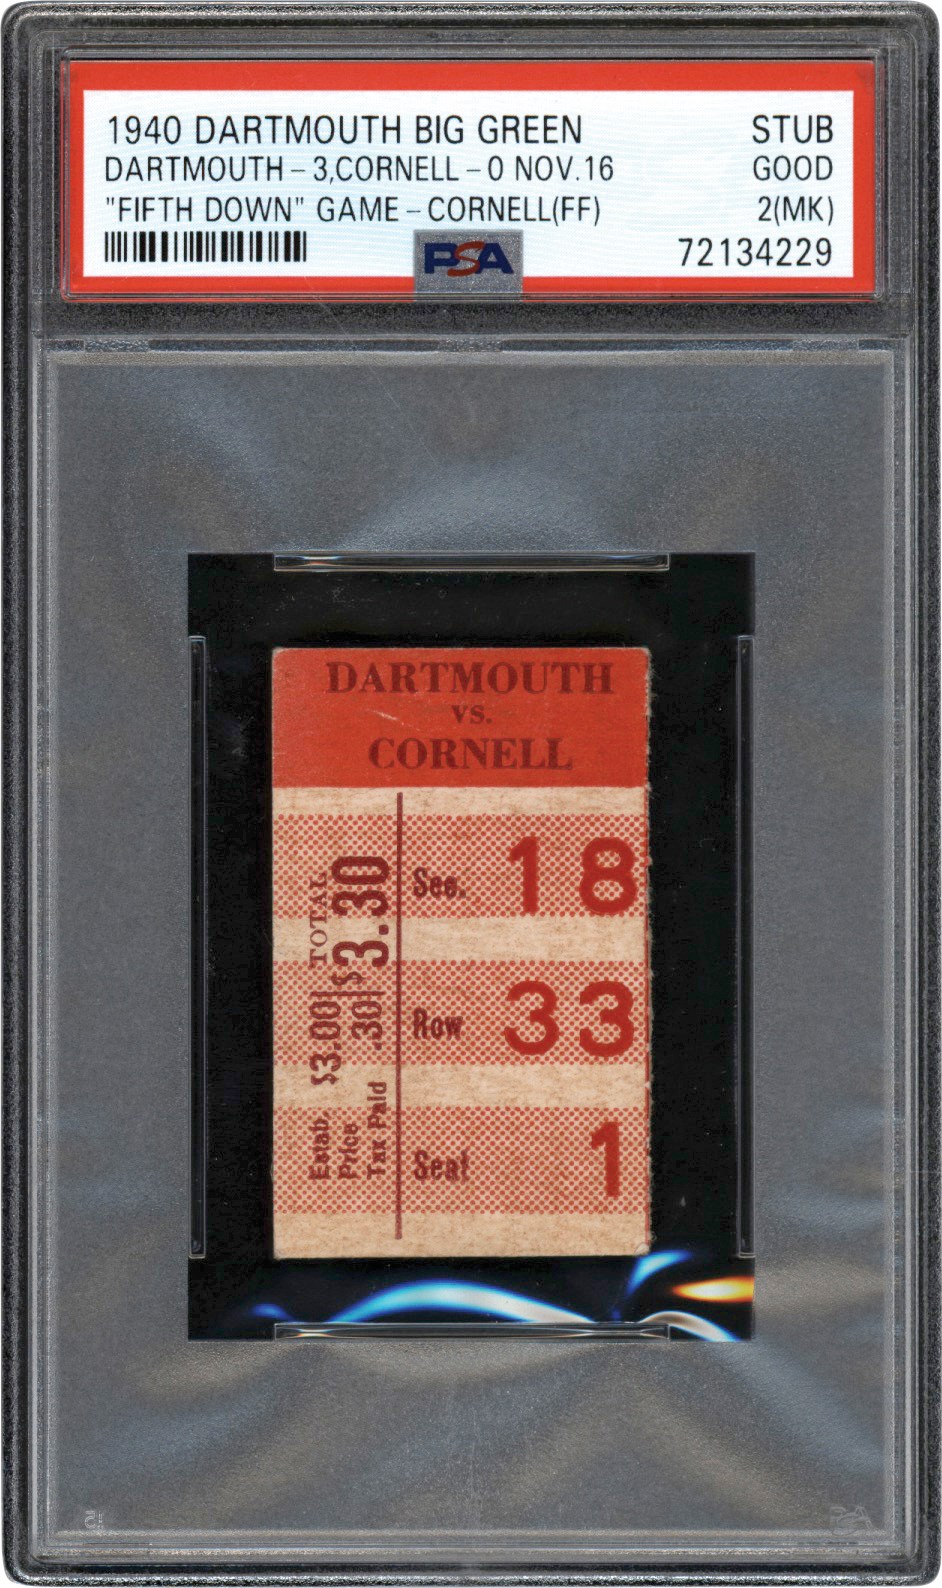 - November 16th, 1940, Cornell vs. Dartmouth "Fifth Down" Game Ticket Stub - Only Known Example PSA GD 2 (MK)